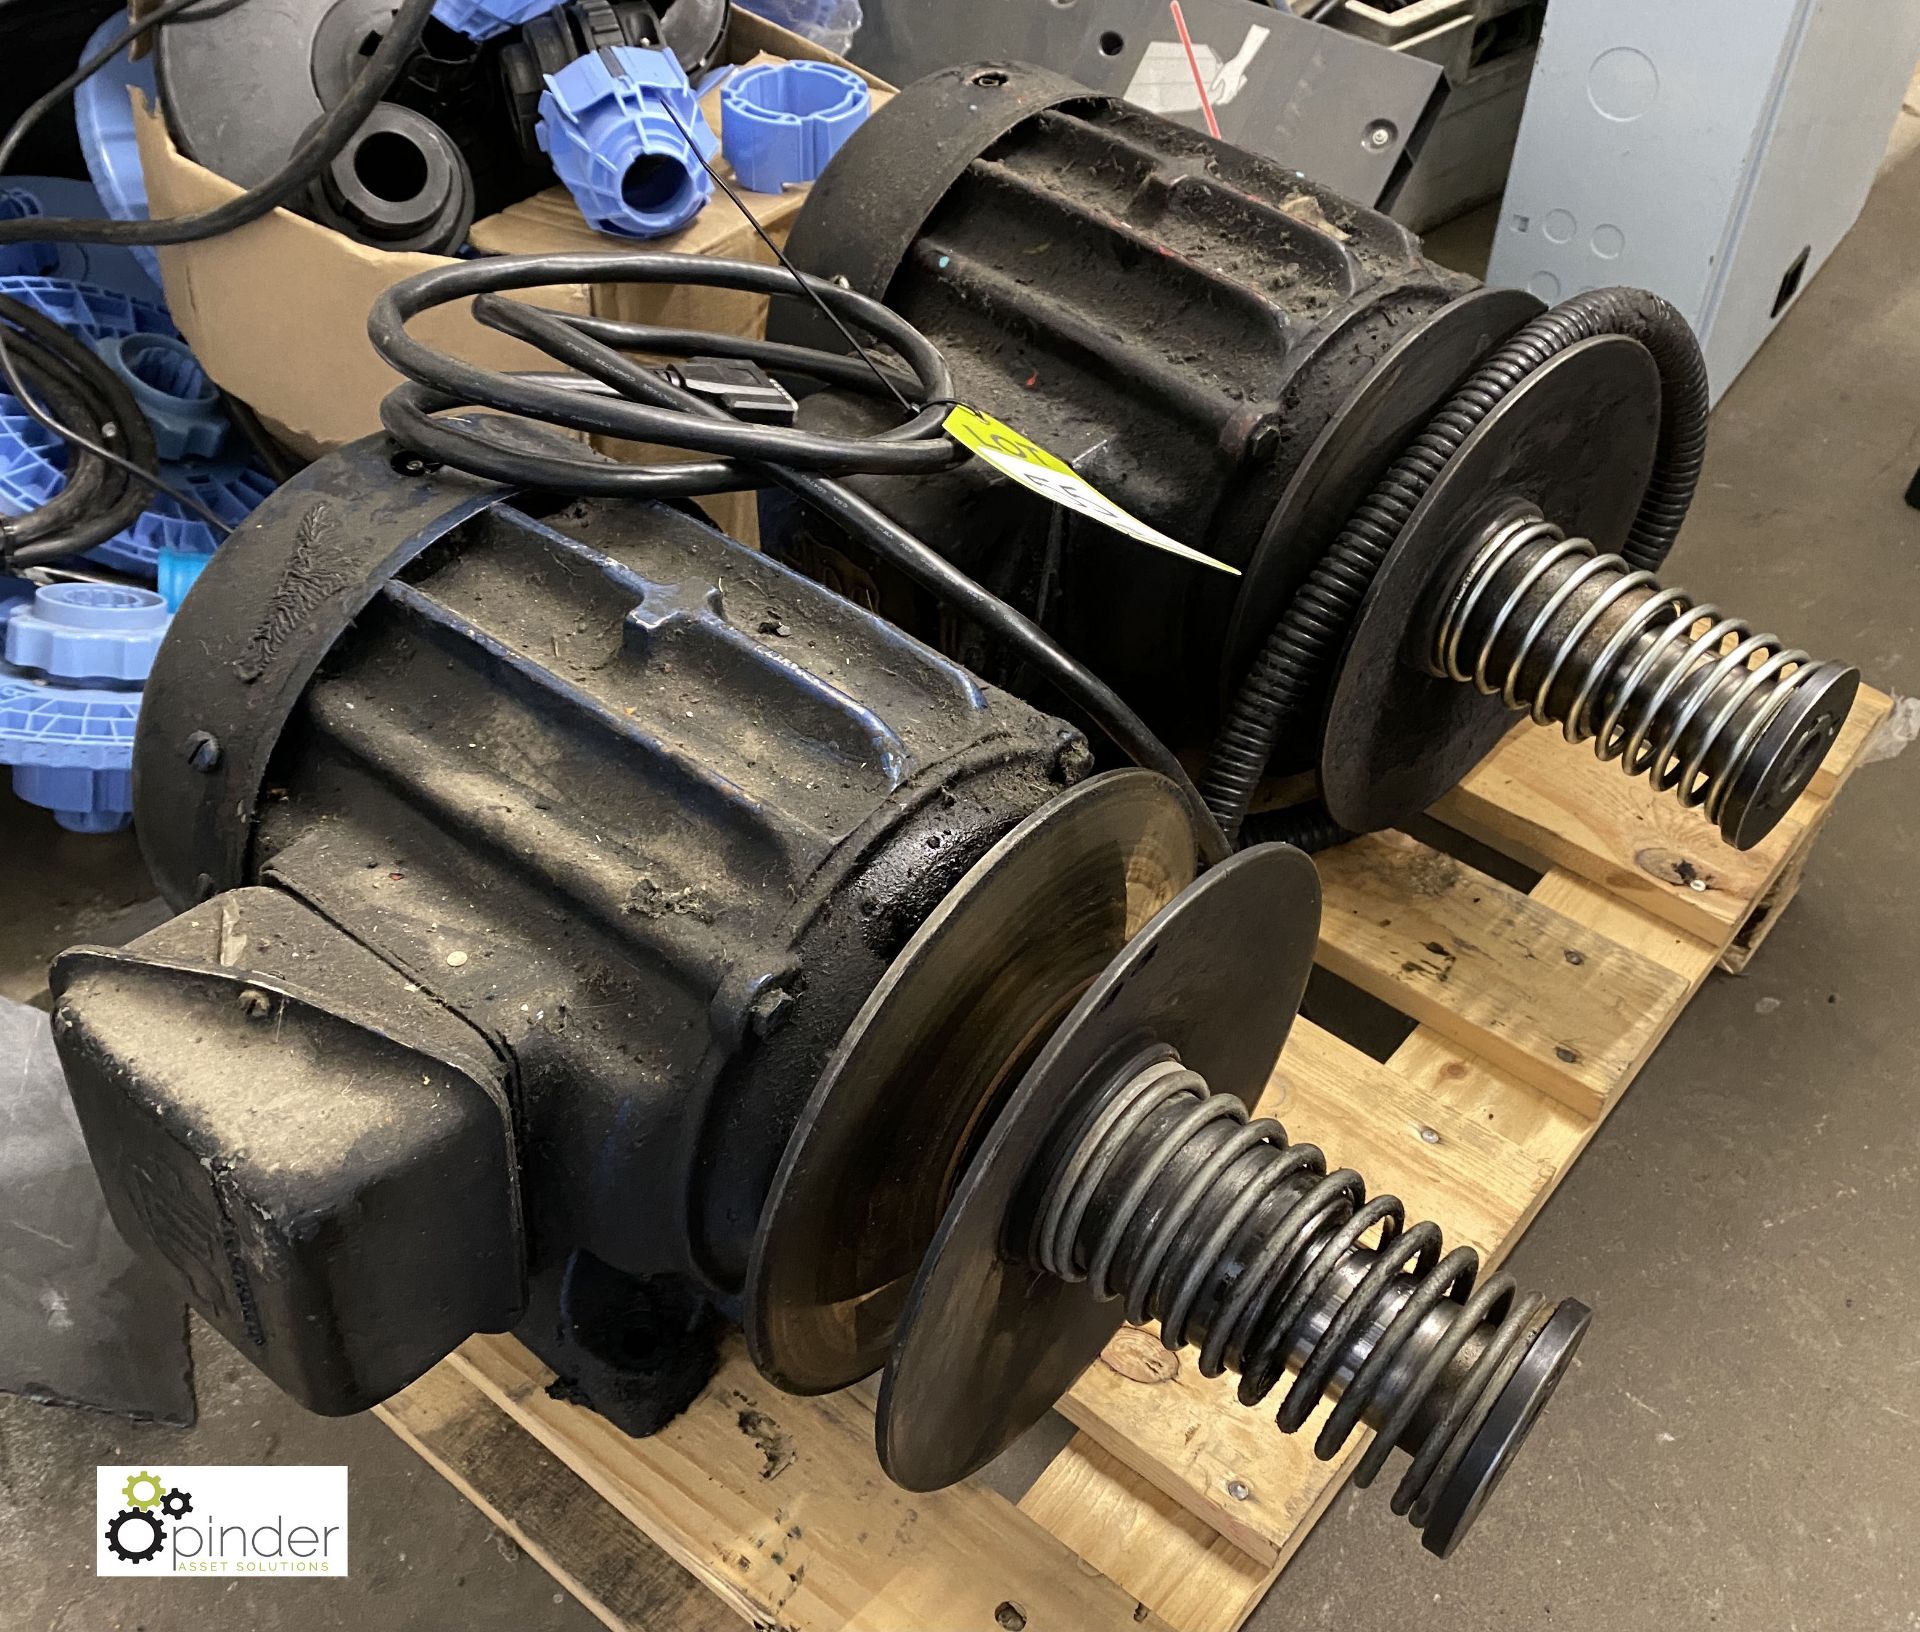 2 Electric Motors, from Heidelberg 10x15 platen press (LOCATION: Penistone) (please note there is